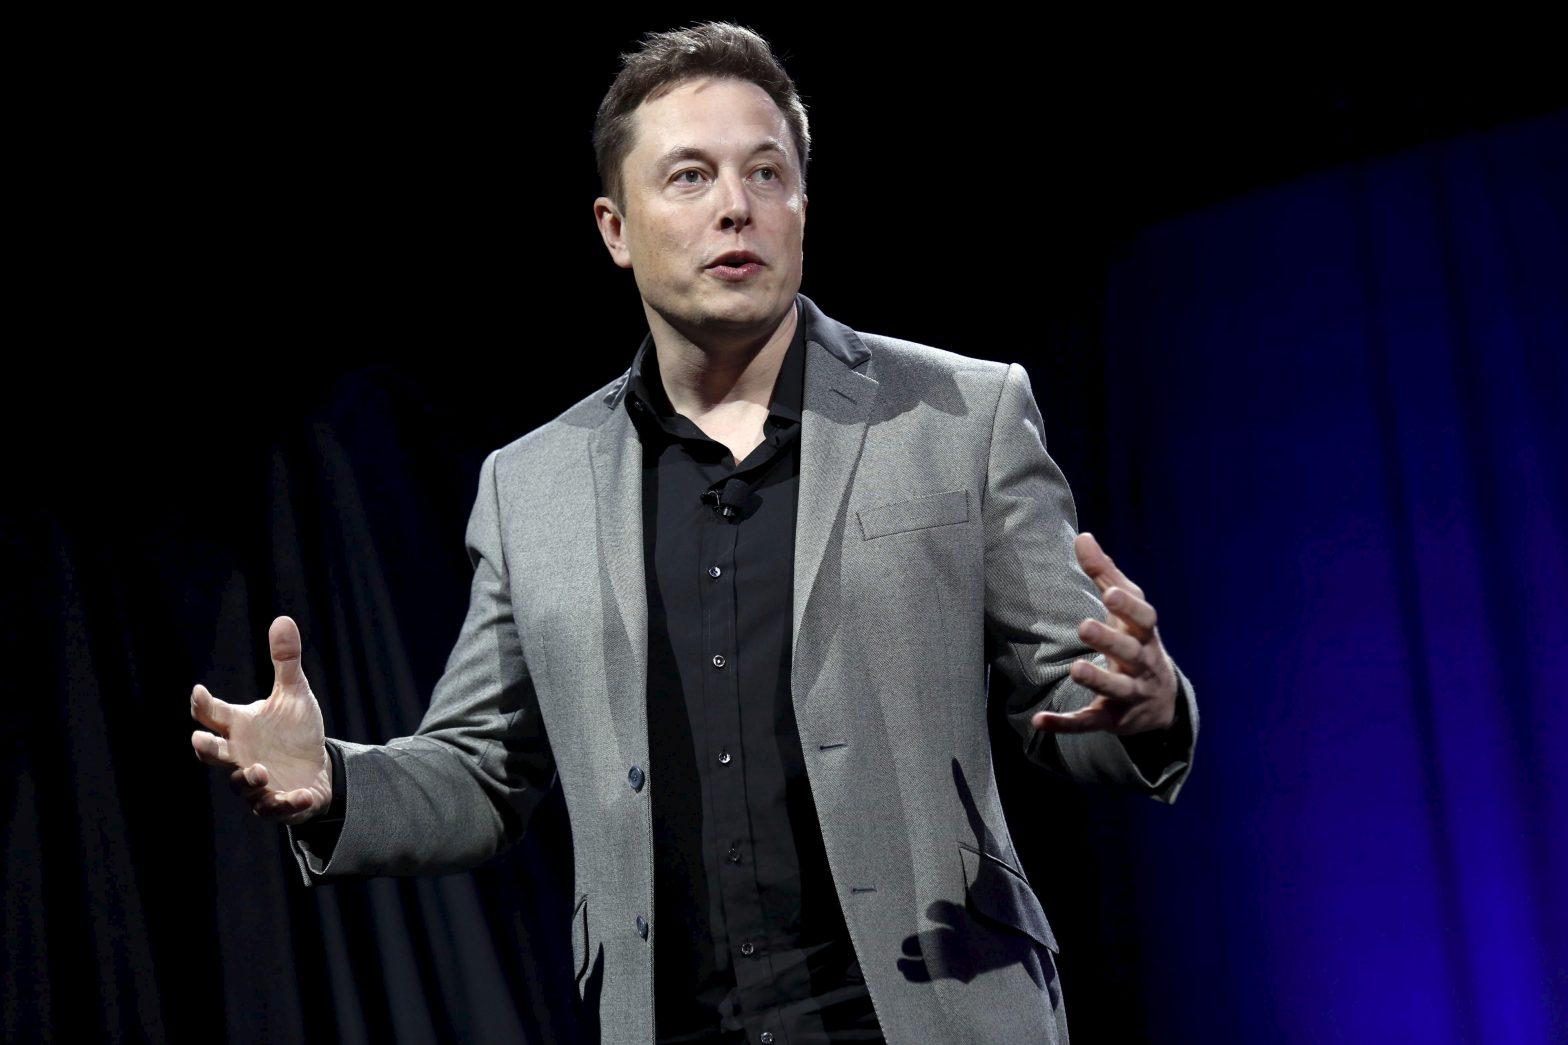 Elon Musk reclaims to the top, becomes richest person